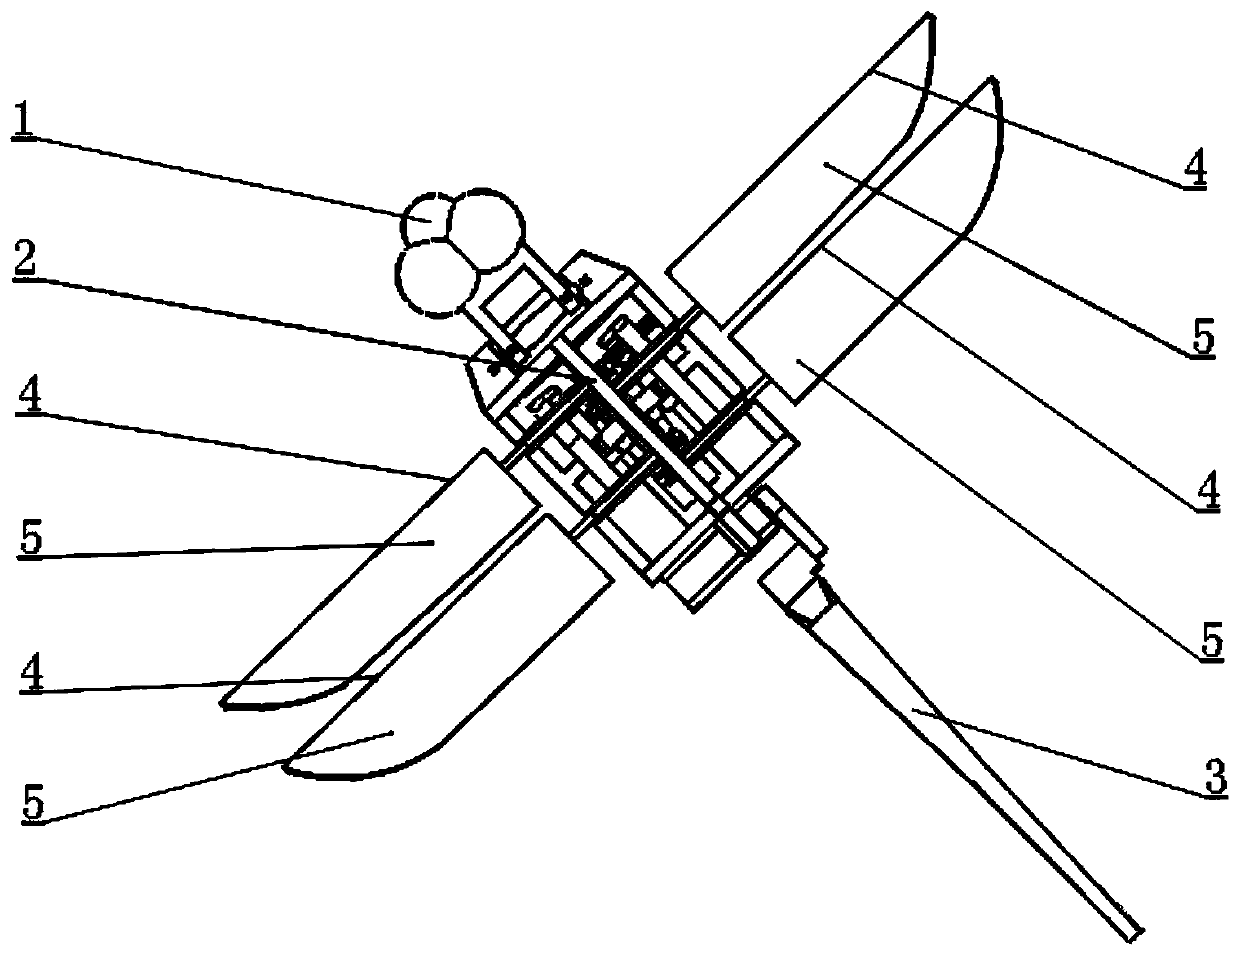 Miniature dragonfly-imitating double-flapping-wing aircraft